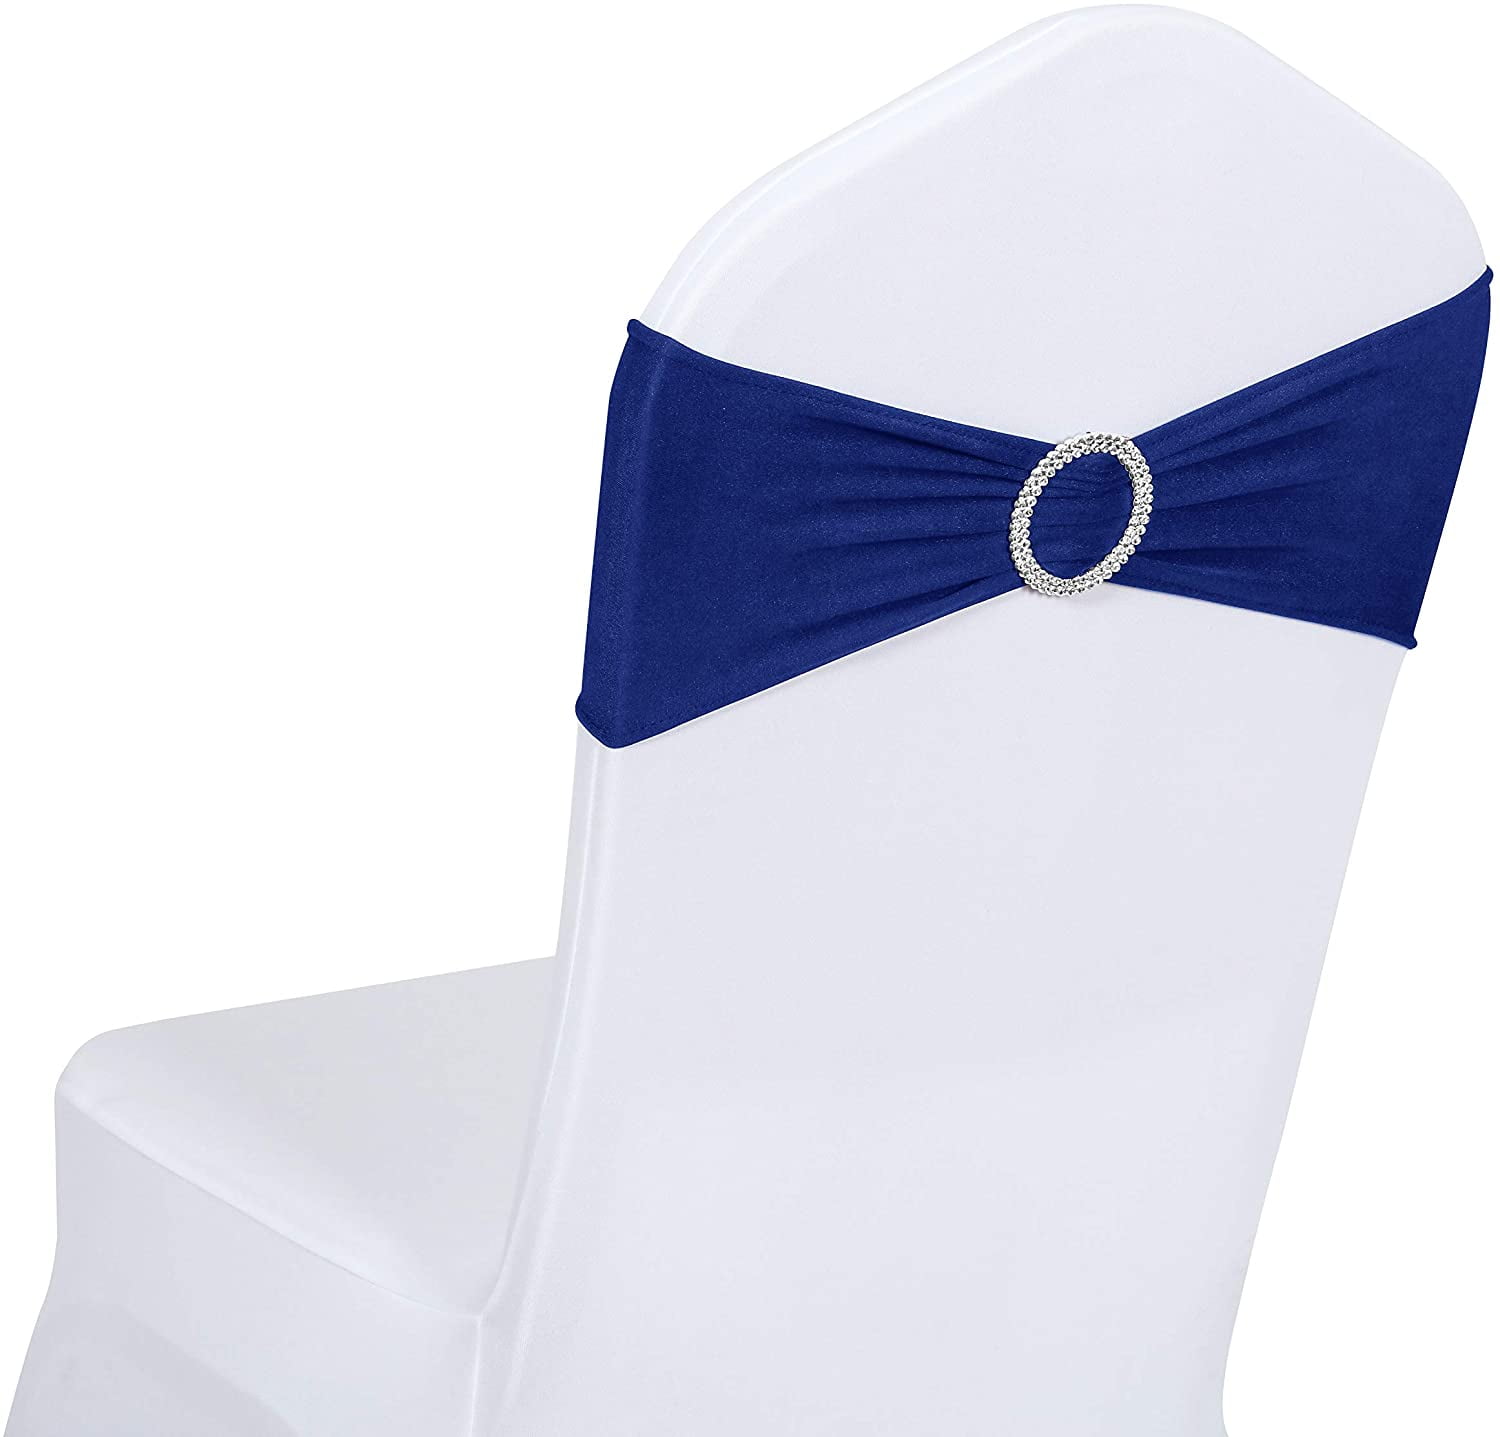 13 Sky Blue 50PCS Elastic Stretch Spandex Chair Sashes Bands Bows For Wedding Home Party Suppliers Decorations 